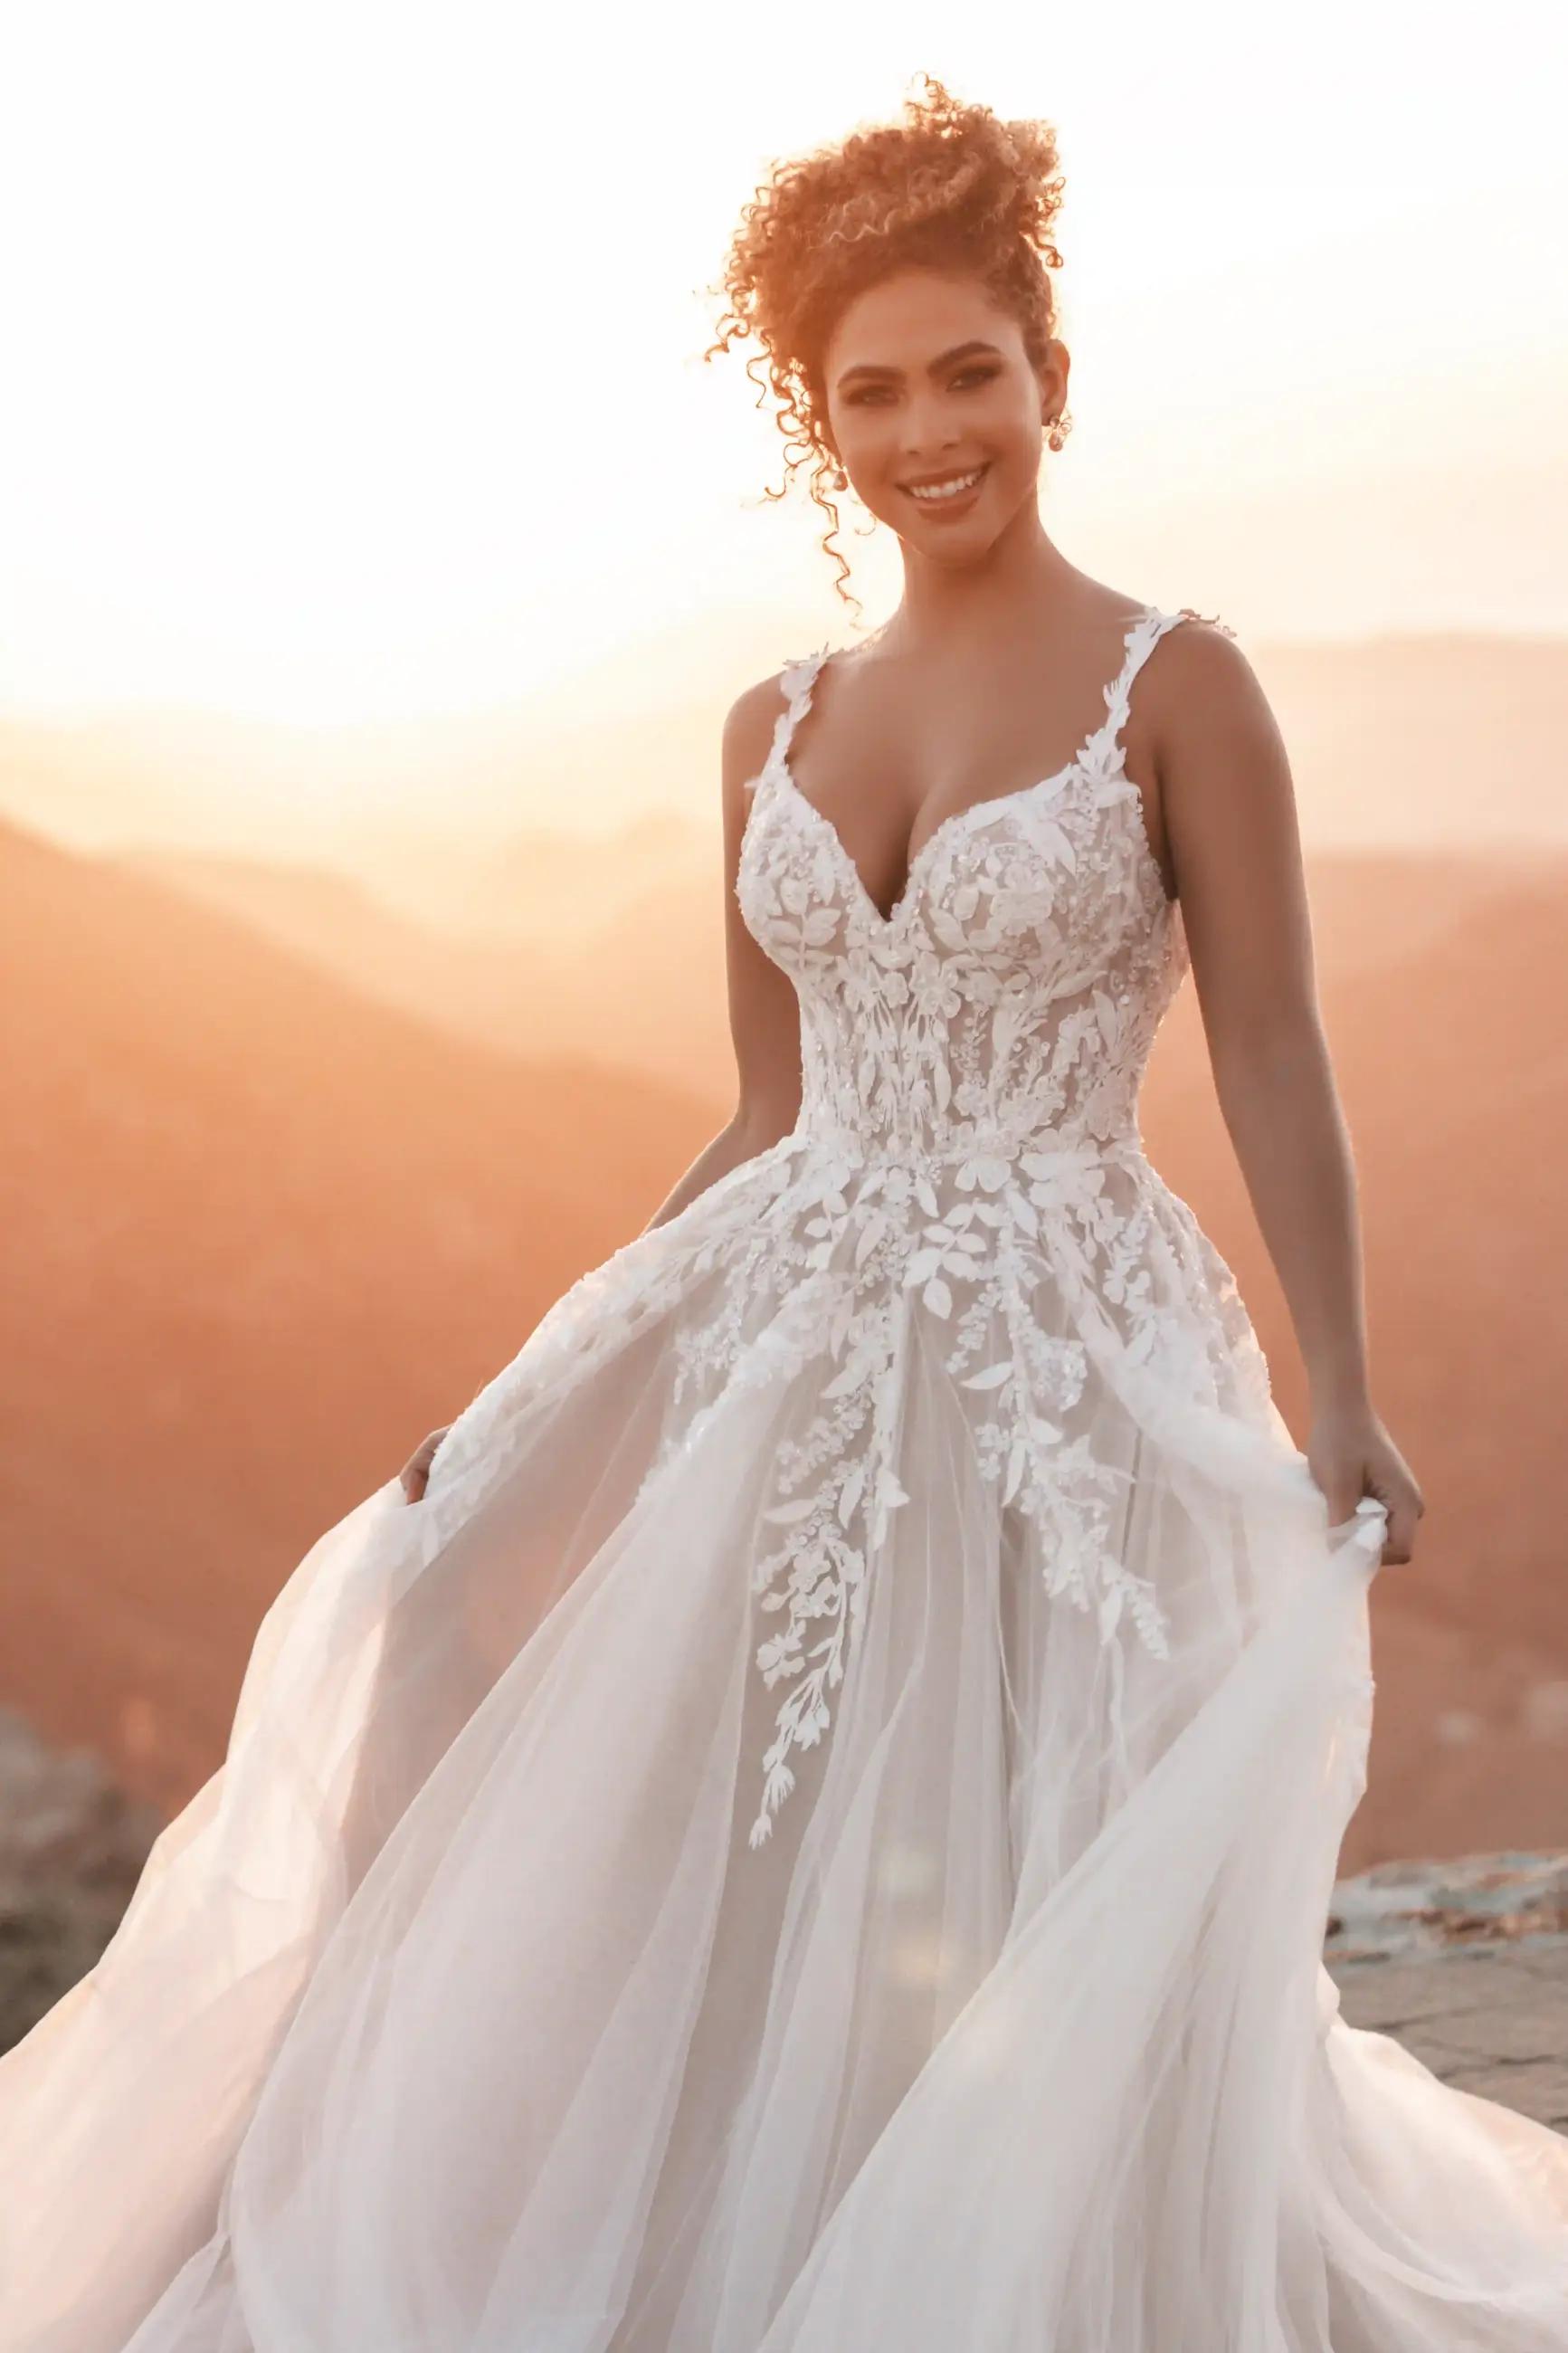 Plus size model wearing a white Allure Gown